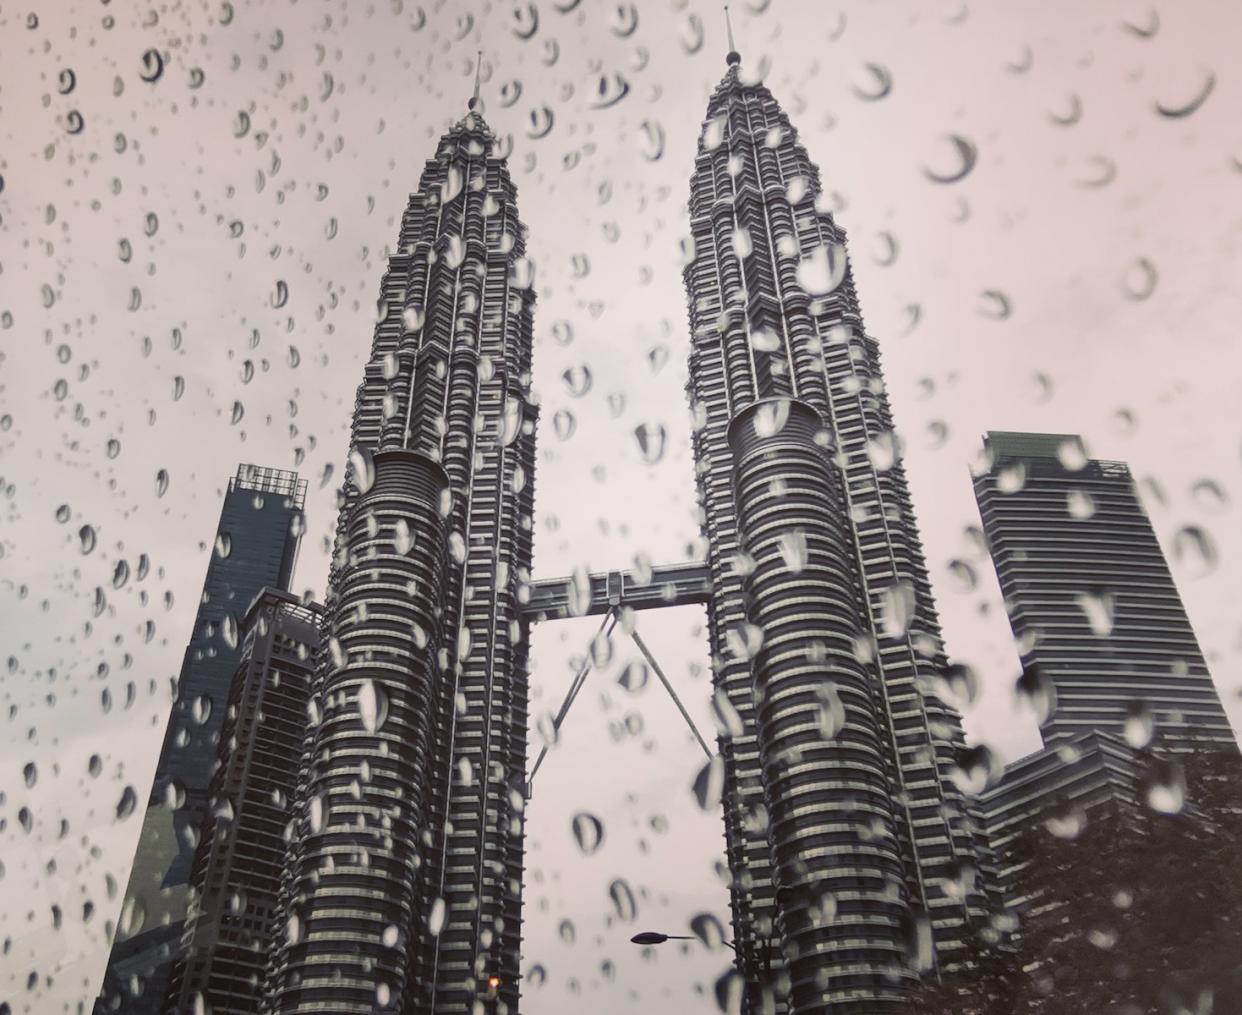 A picture of the Petronas Twin Towers in Kuala Lumpur, taken from behind a wet glass.